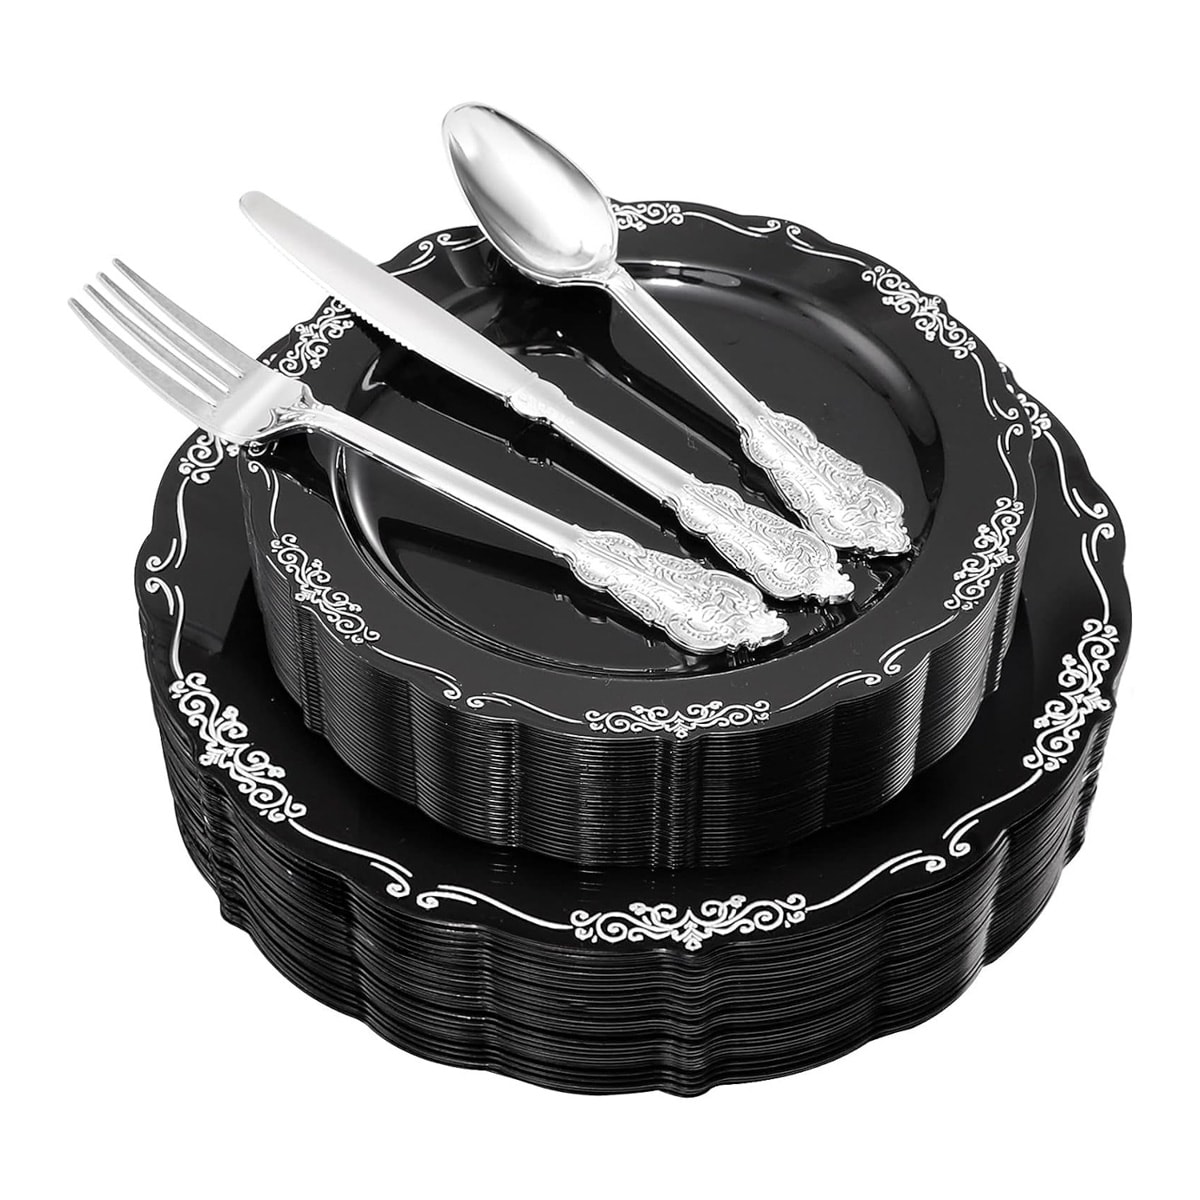 Black and silver disposable plates and silverware.